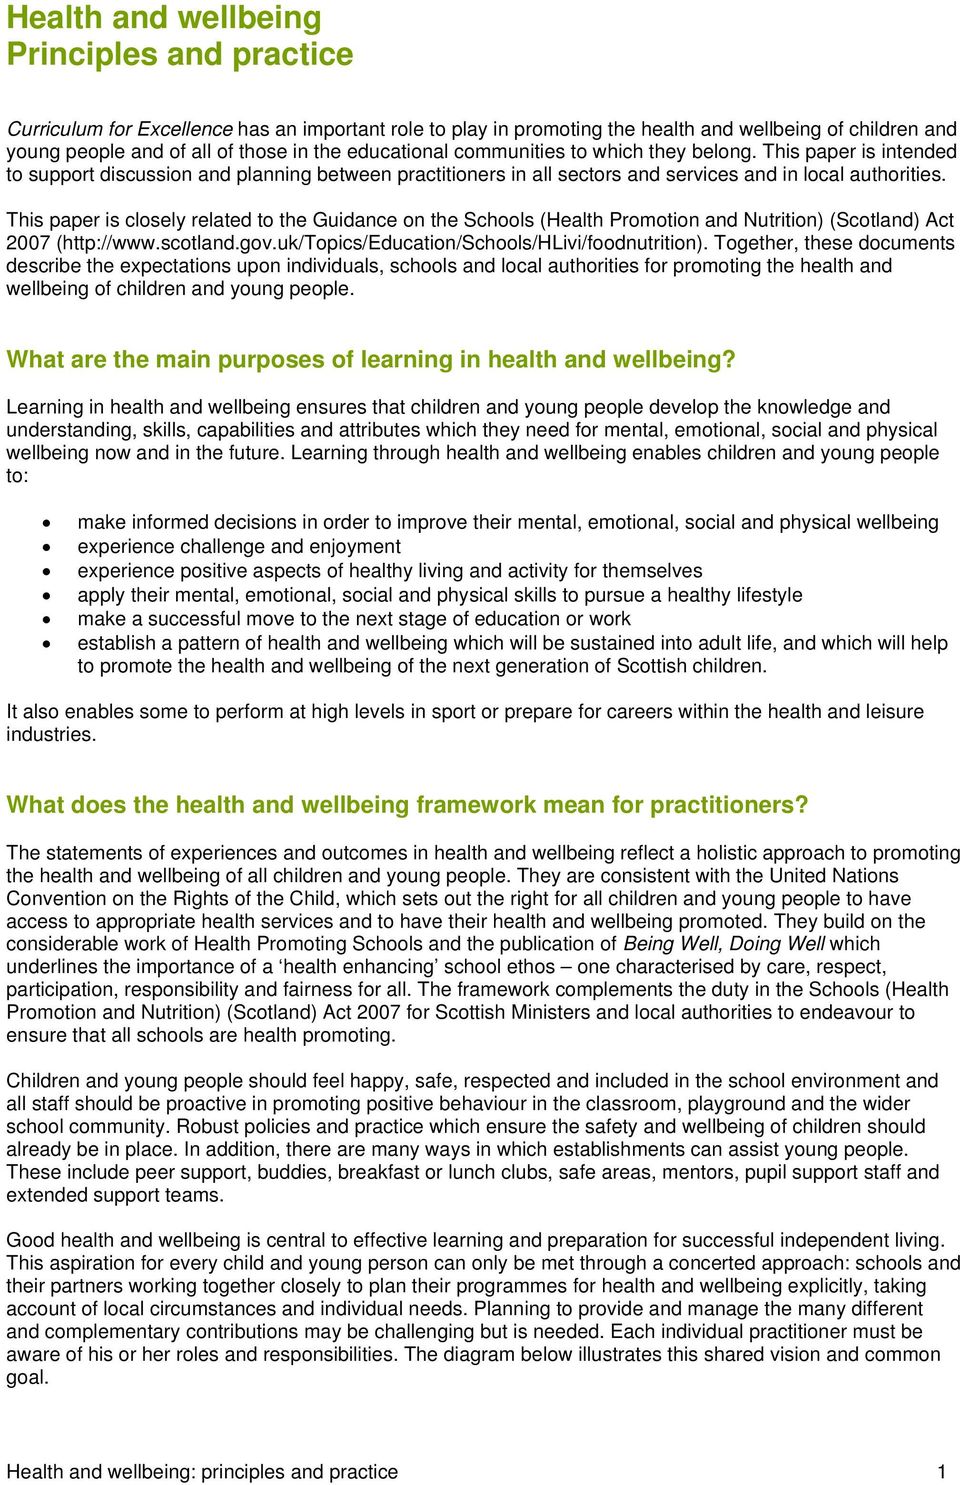 This paper is closely related to the Guidance on the Schools (Health Promotion and Nutrition) (Scotland) Act 2007 (http://www.scotland.gov.uk/topics/education/schools/hlivi/foodnutrition).